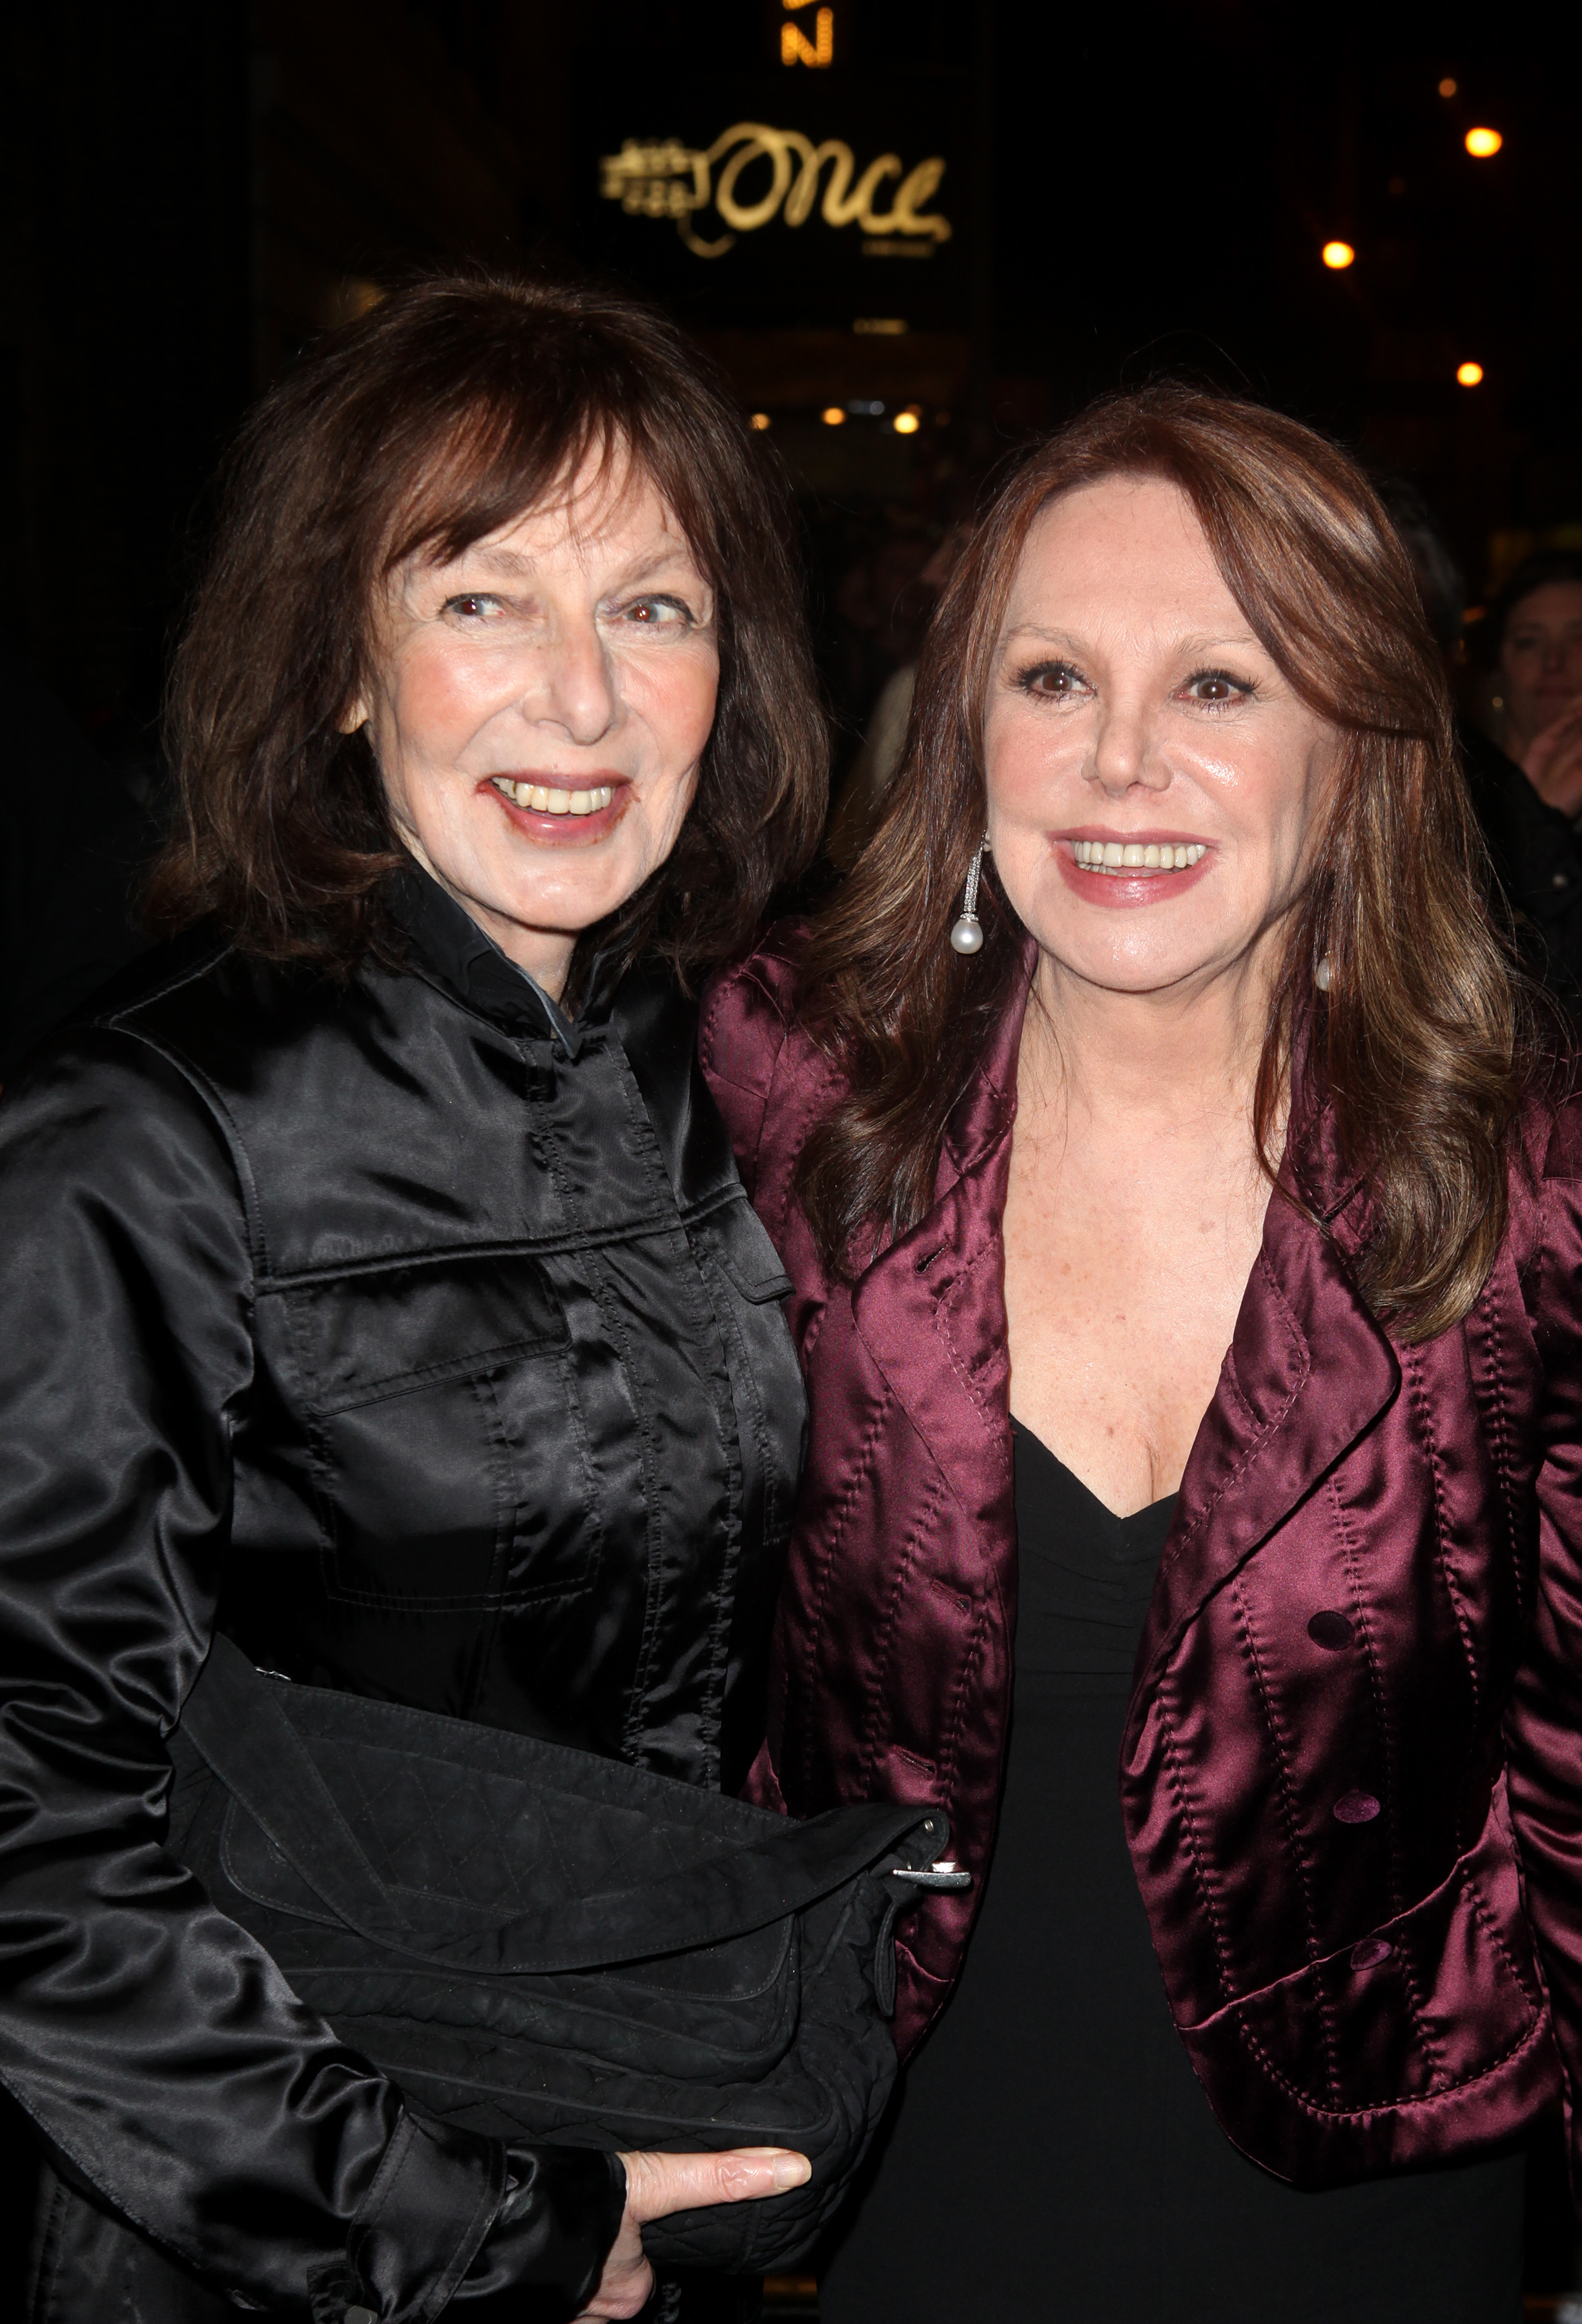 Elaine May and Marlo Thomas after the Broadway opening of Gore Vidal's "The Best Man" at the Gerald Schoenfeld Theatre in New York on April 1, 2012. | Source: Getty Images